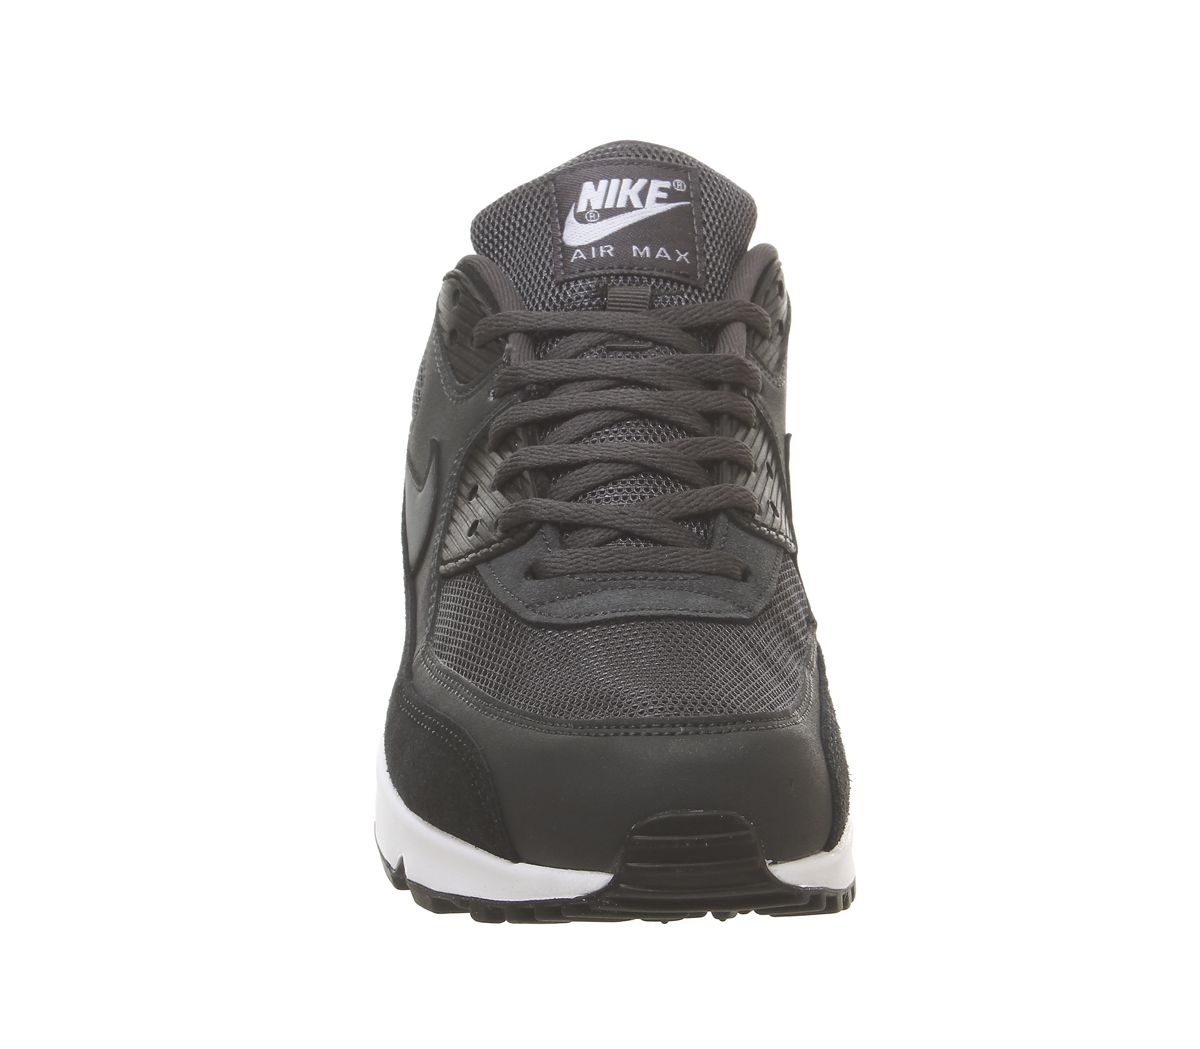 Nike Air Max 90 Trainers Anthracite White Black - His trainers